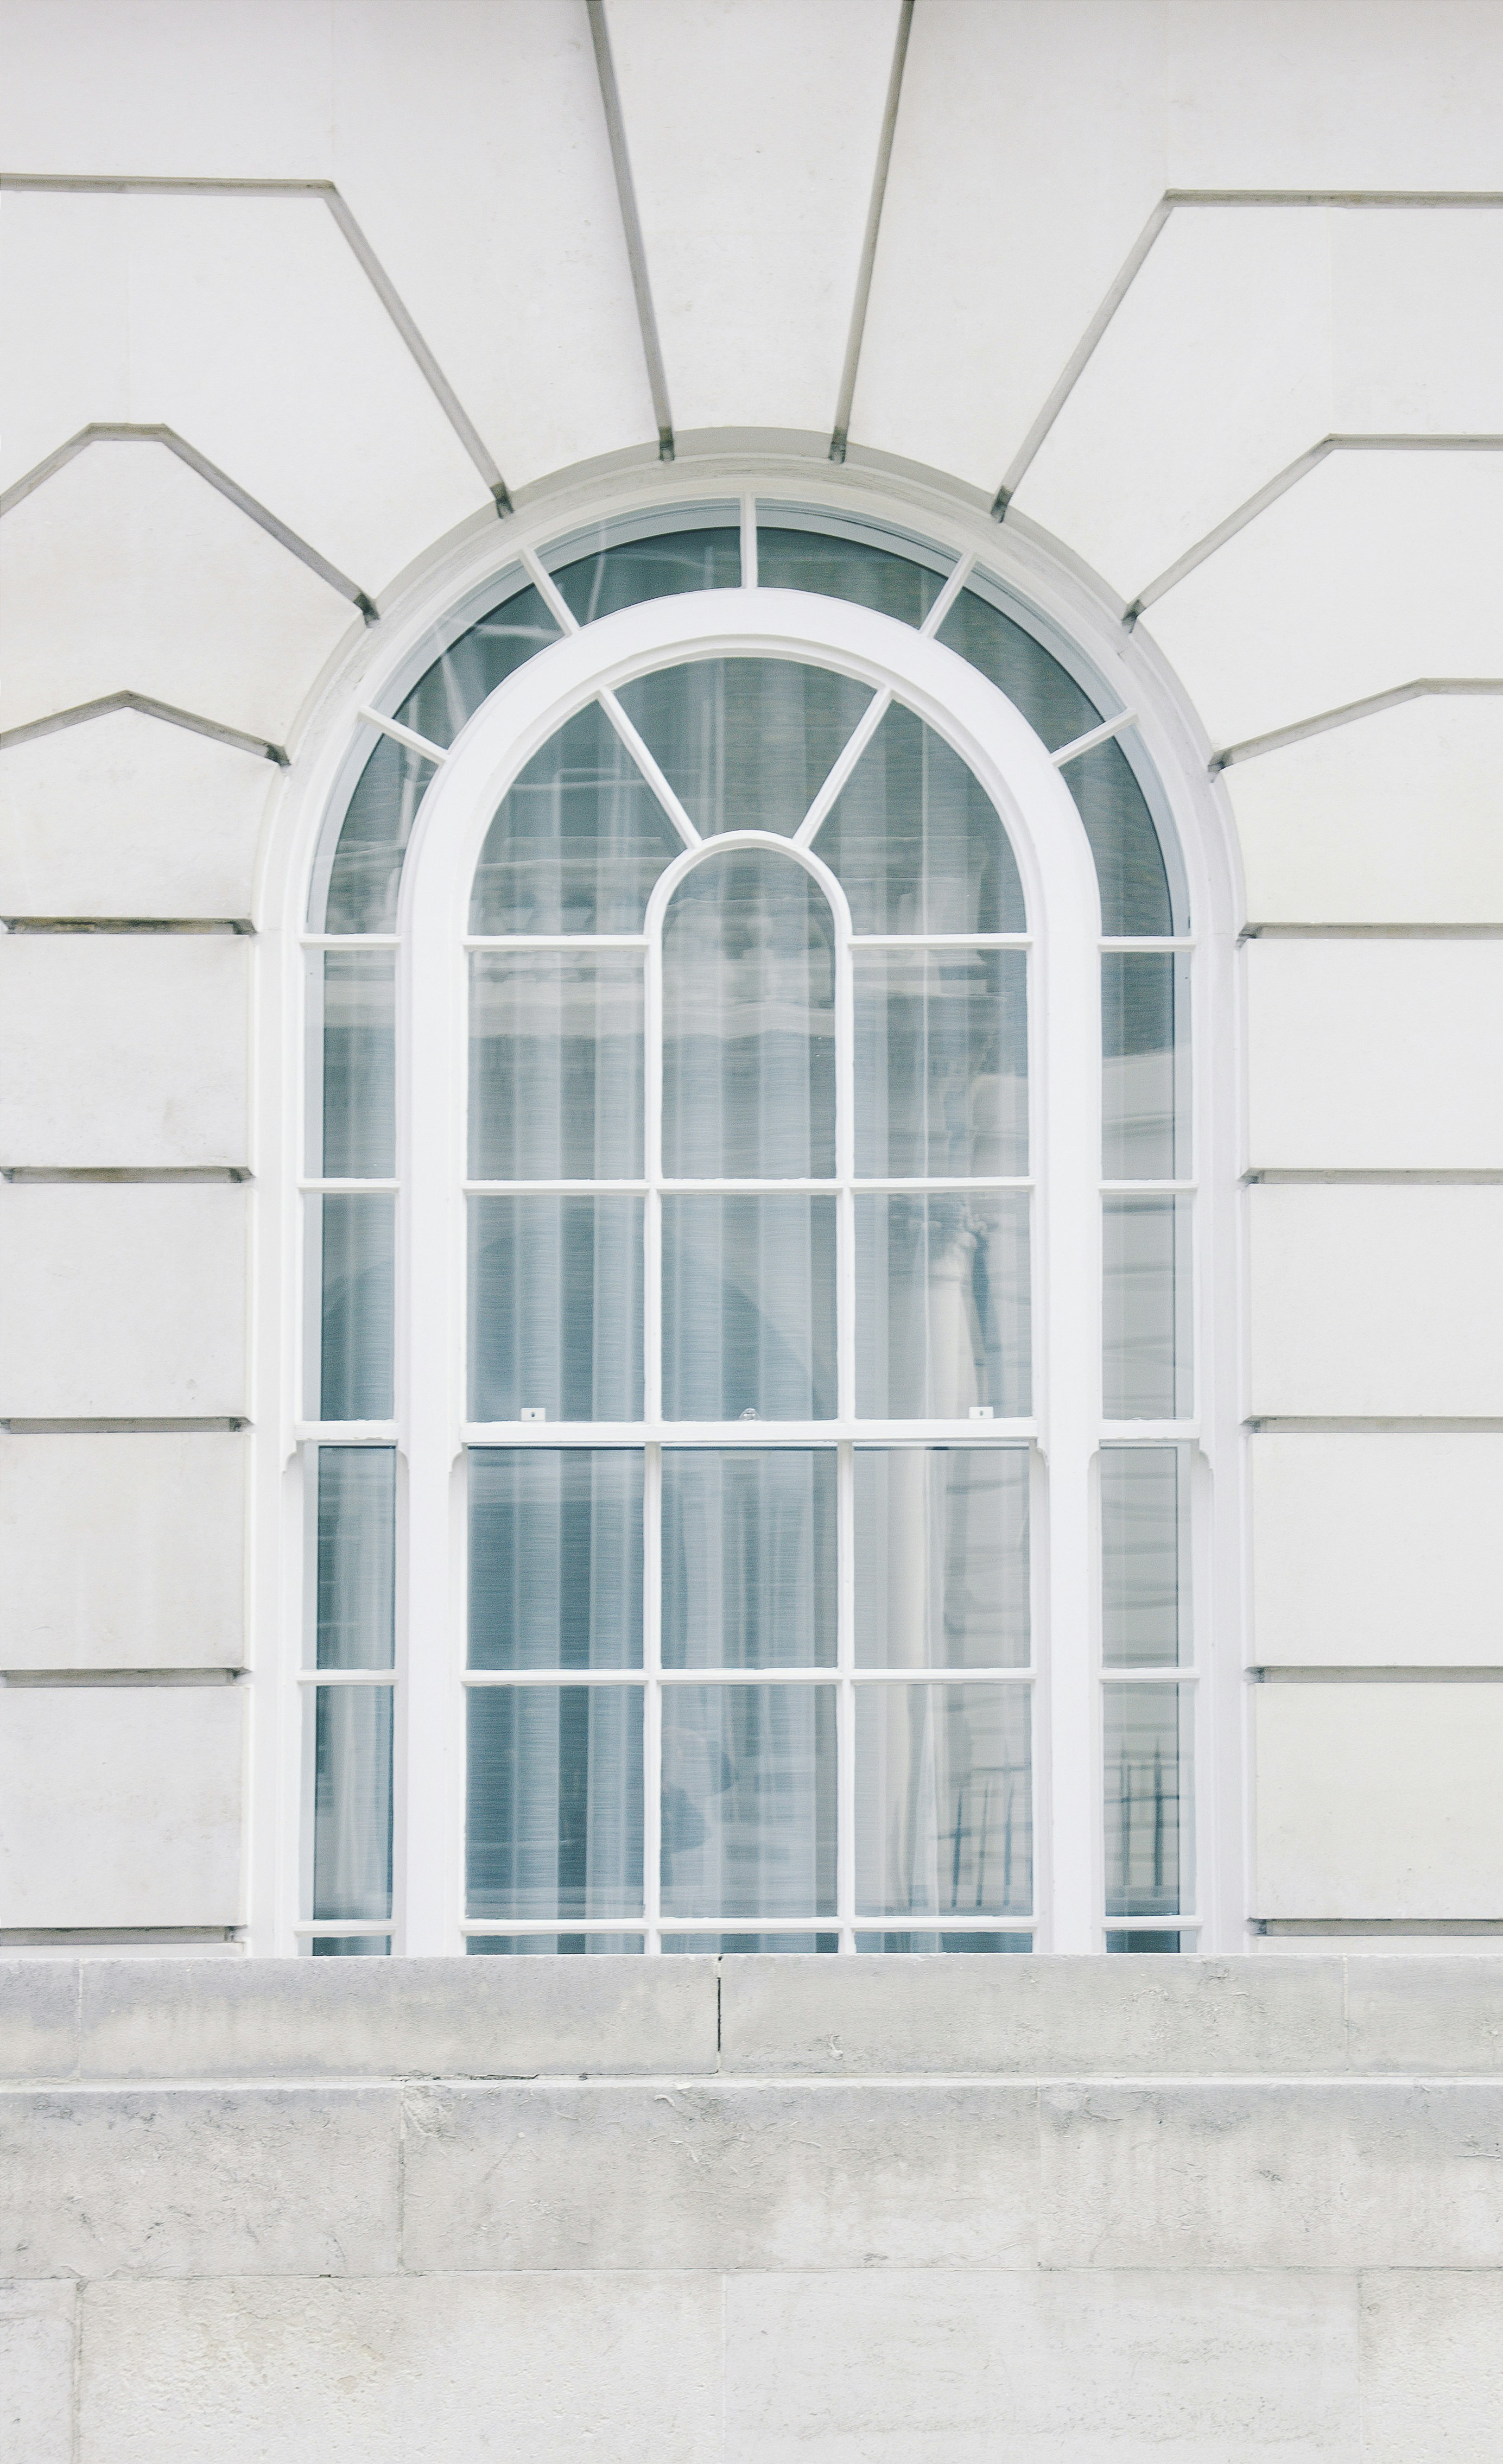 White arched window